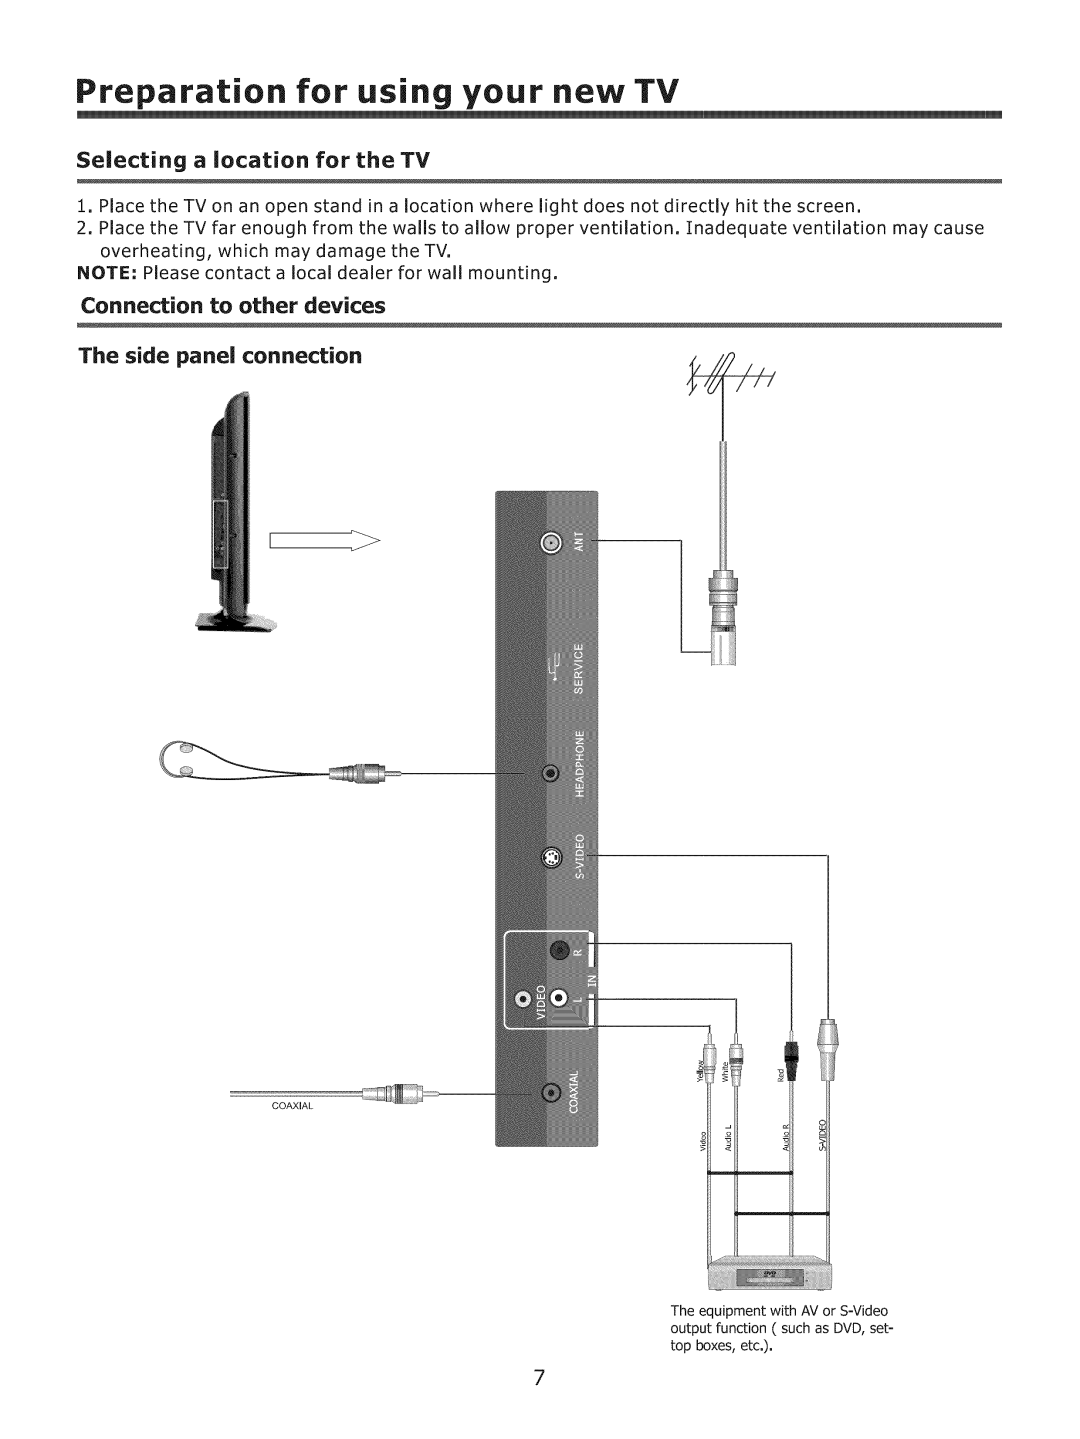 ProScan 37LC30S57 user manual Preparation for using your new TV, Connection to other devices The side panel connection 